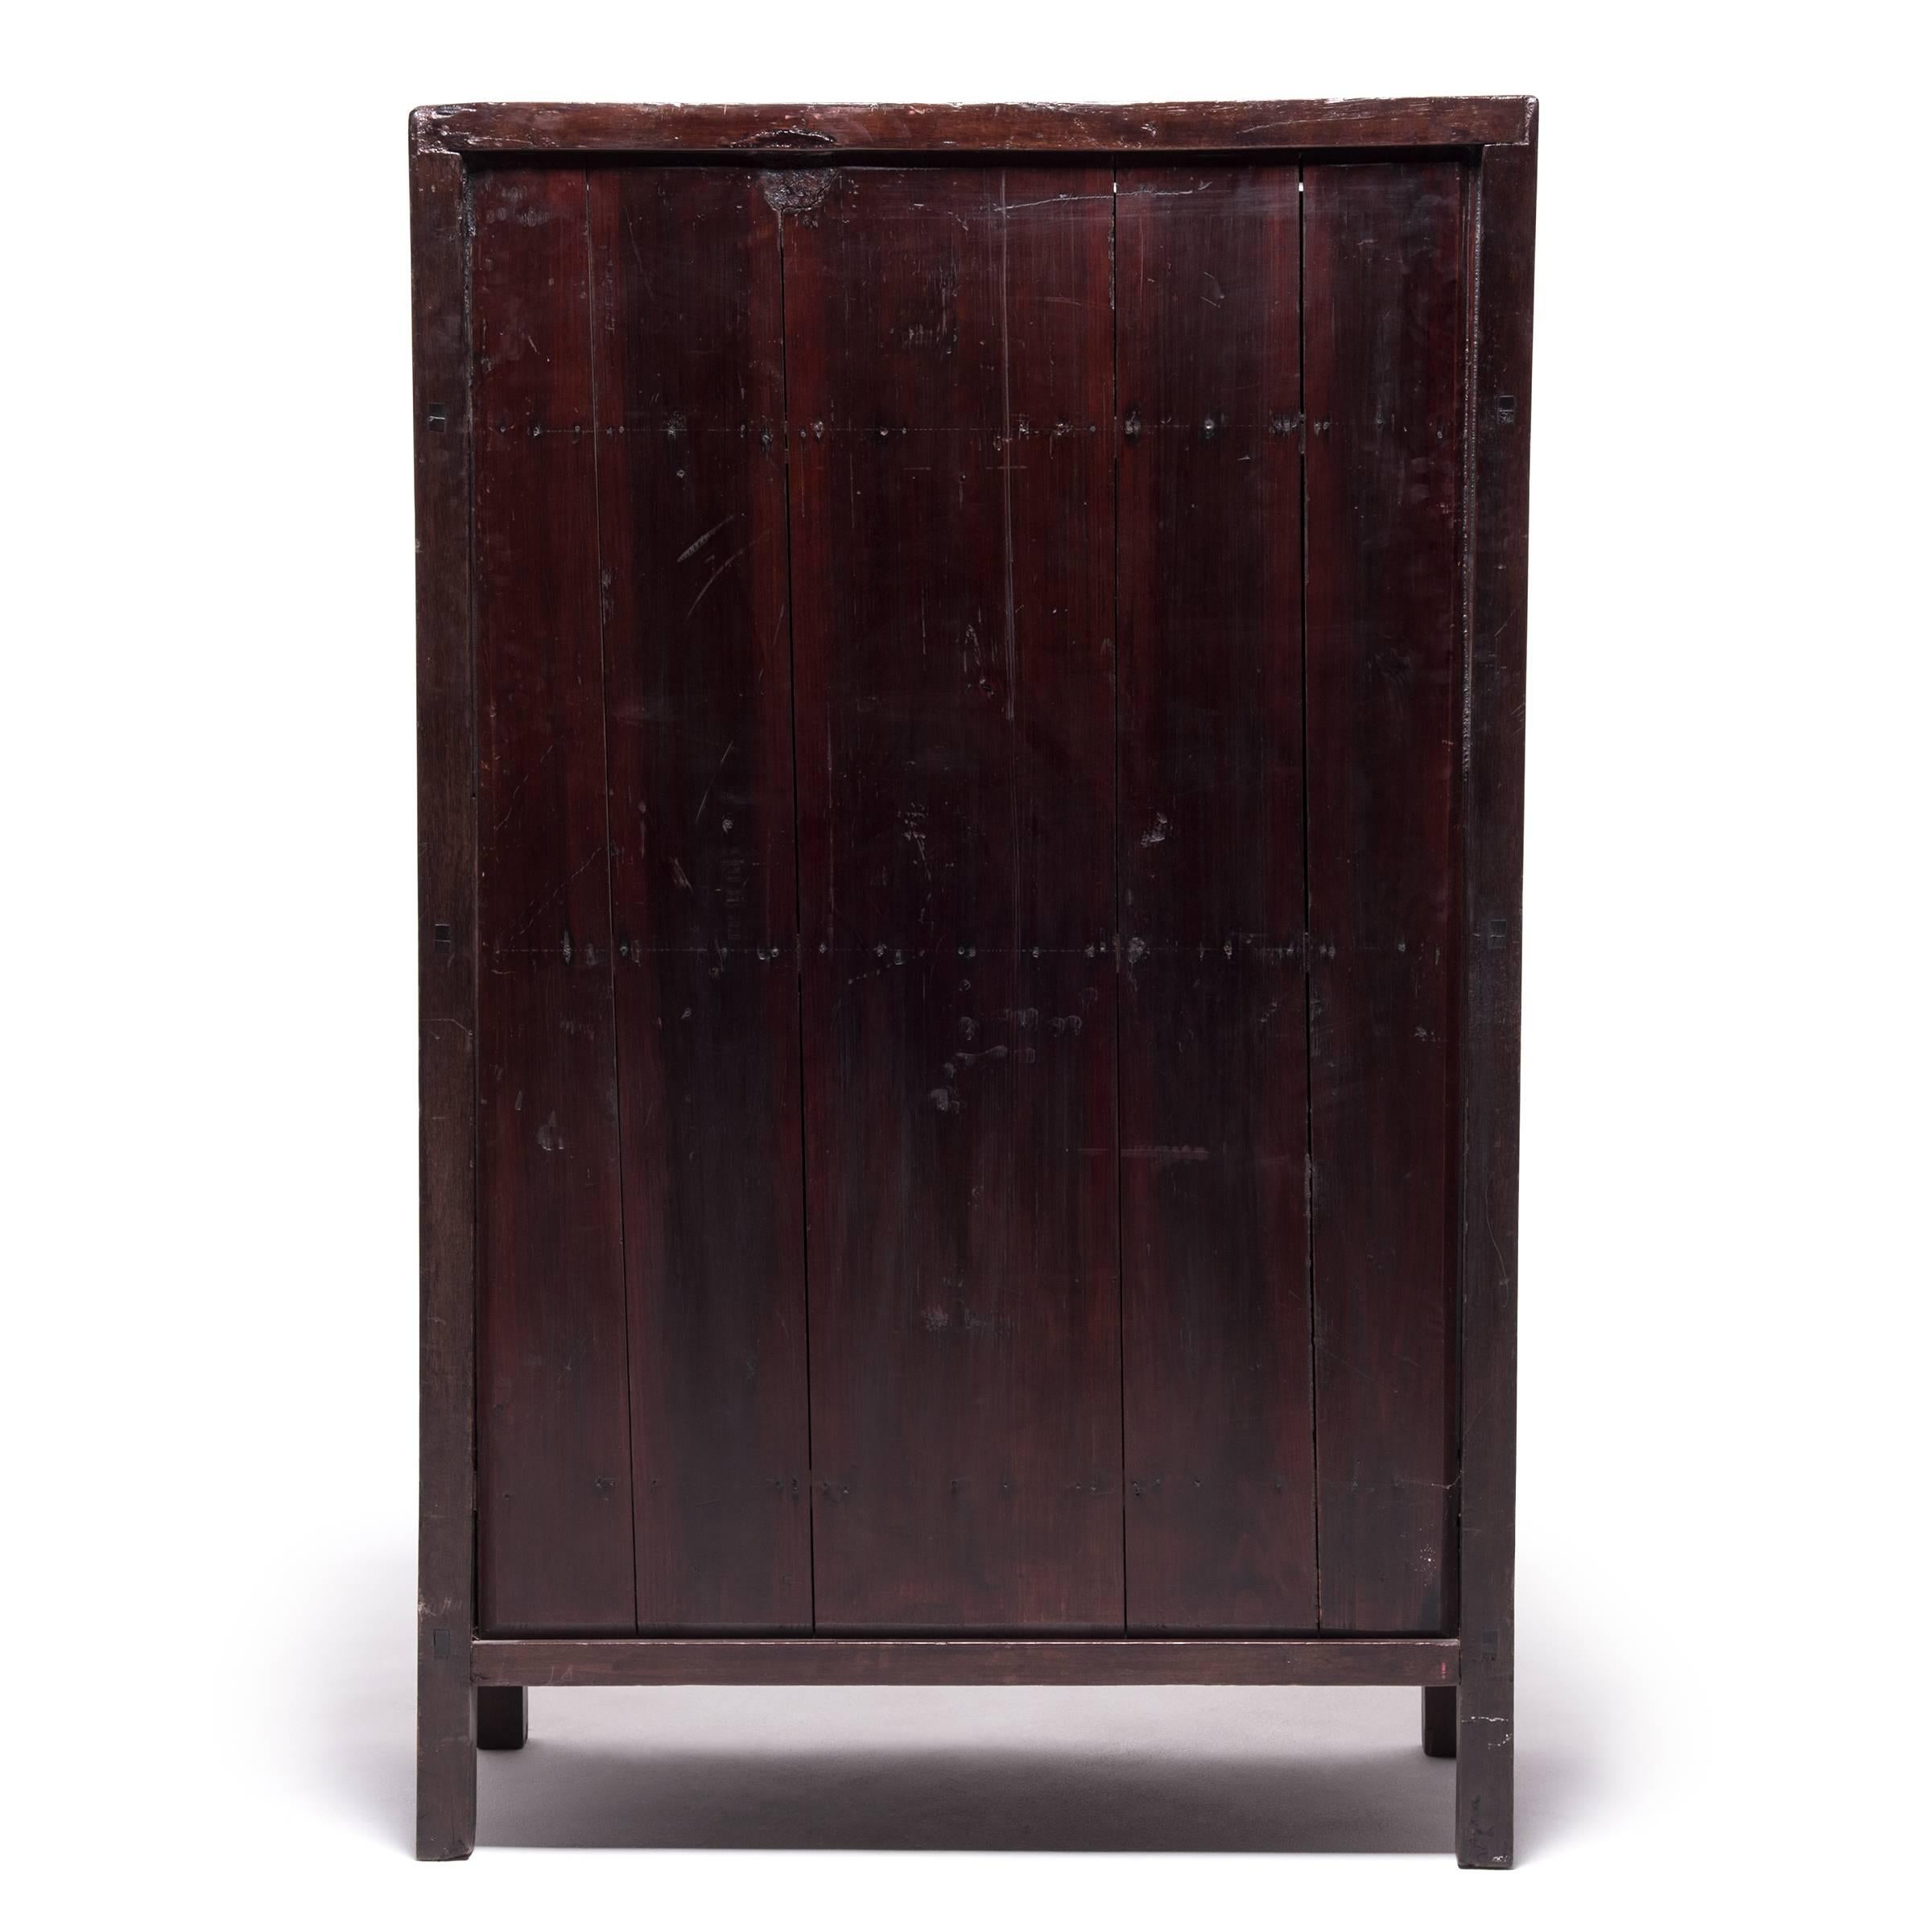 Polished Early 19th Century Chinese Two-Door Cabinet